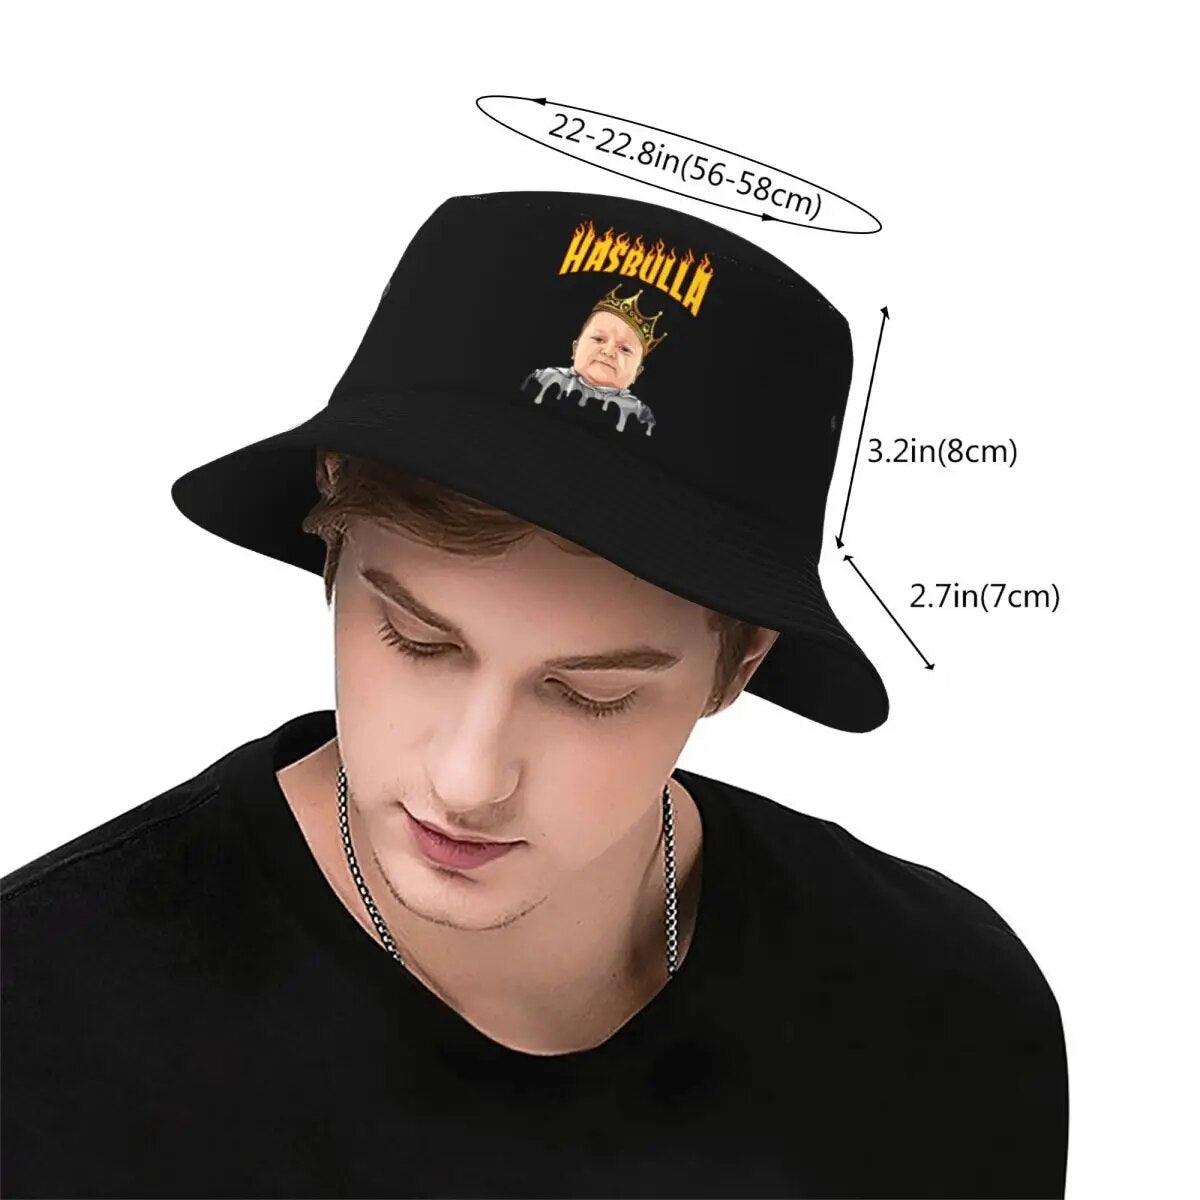 Hasbulla Bucket Hat - Silly Sausage Gifts